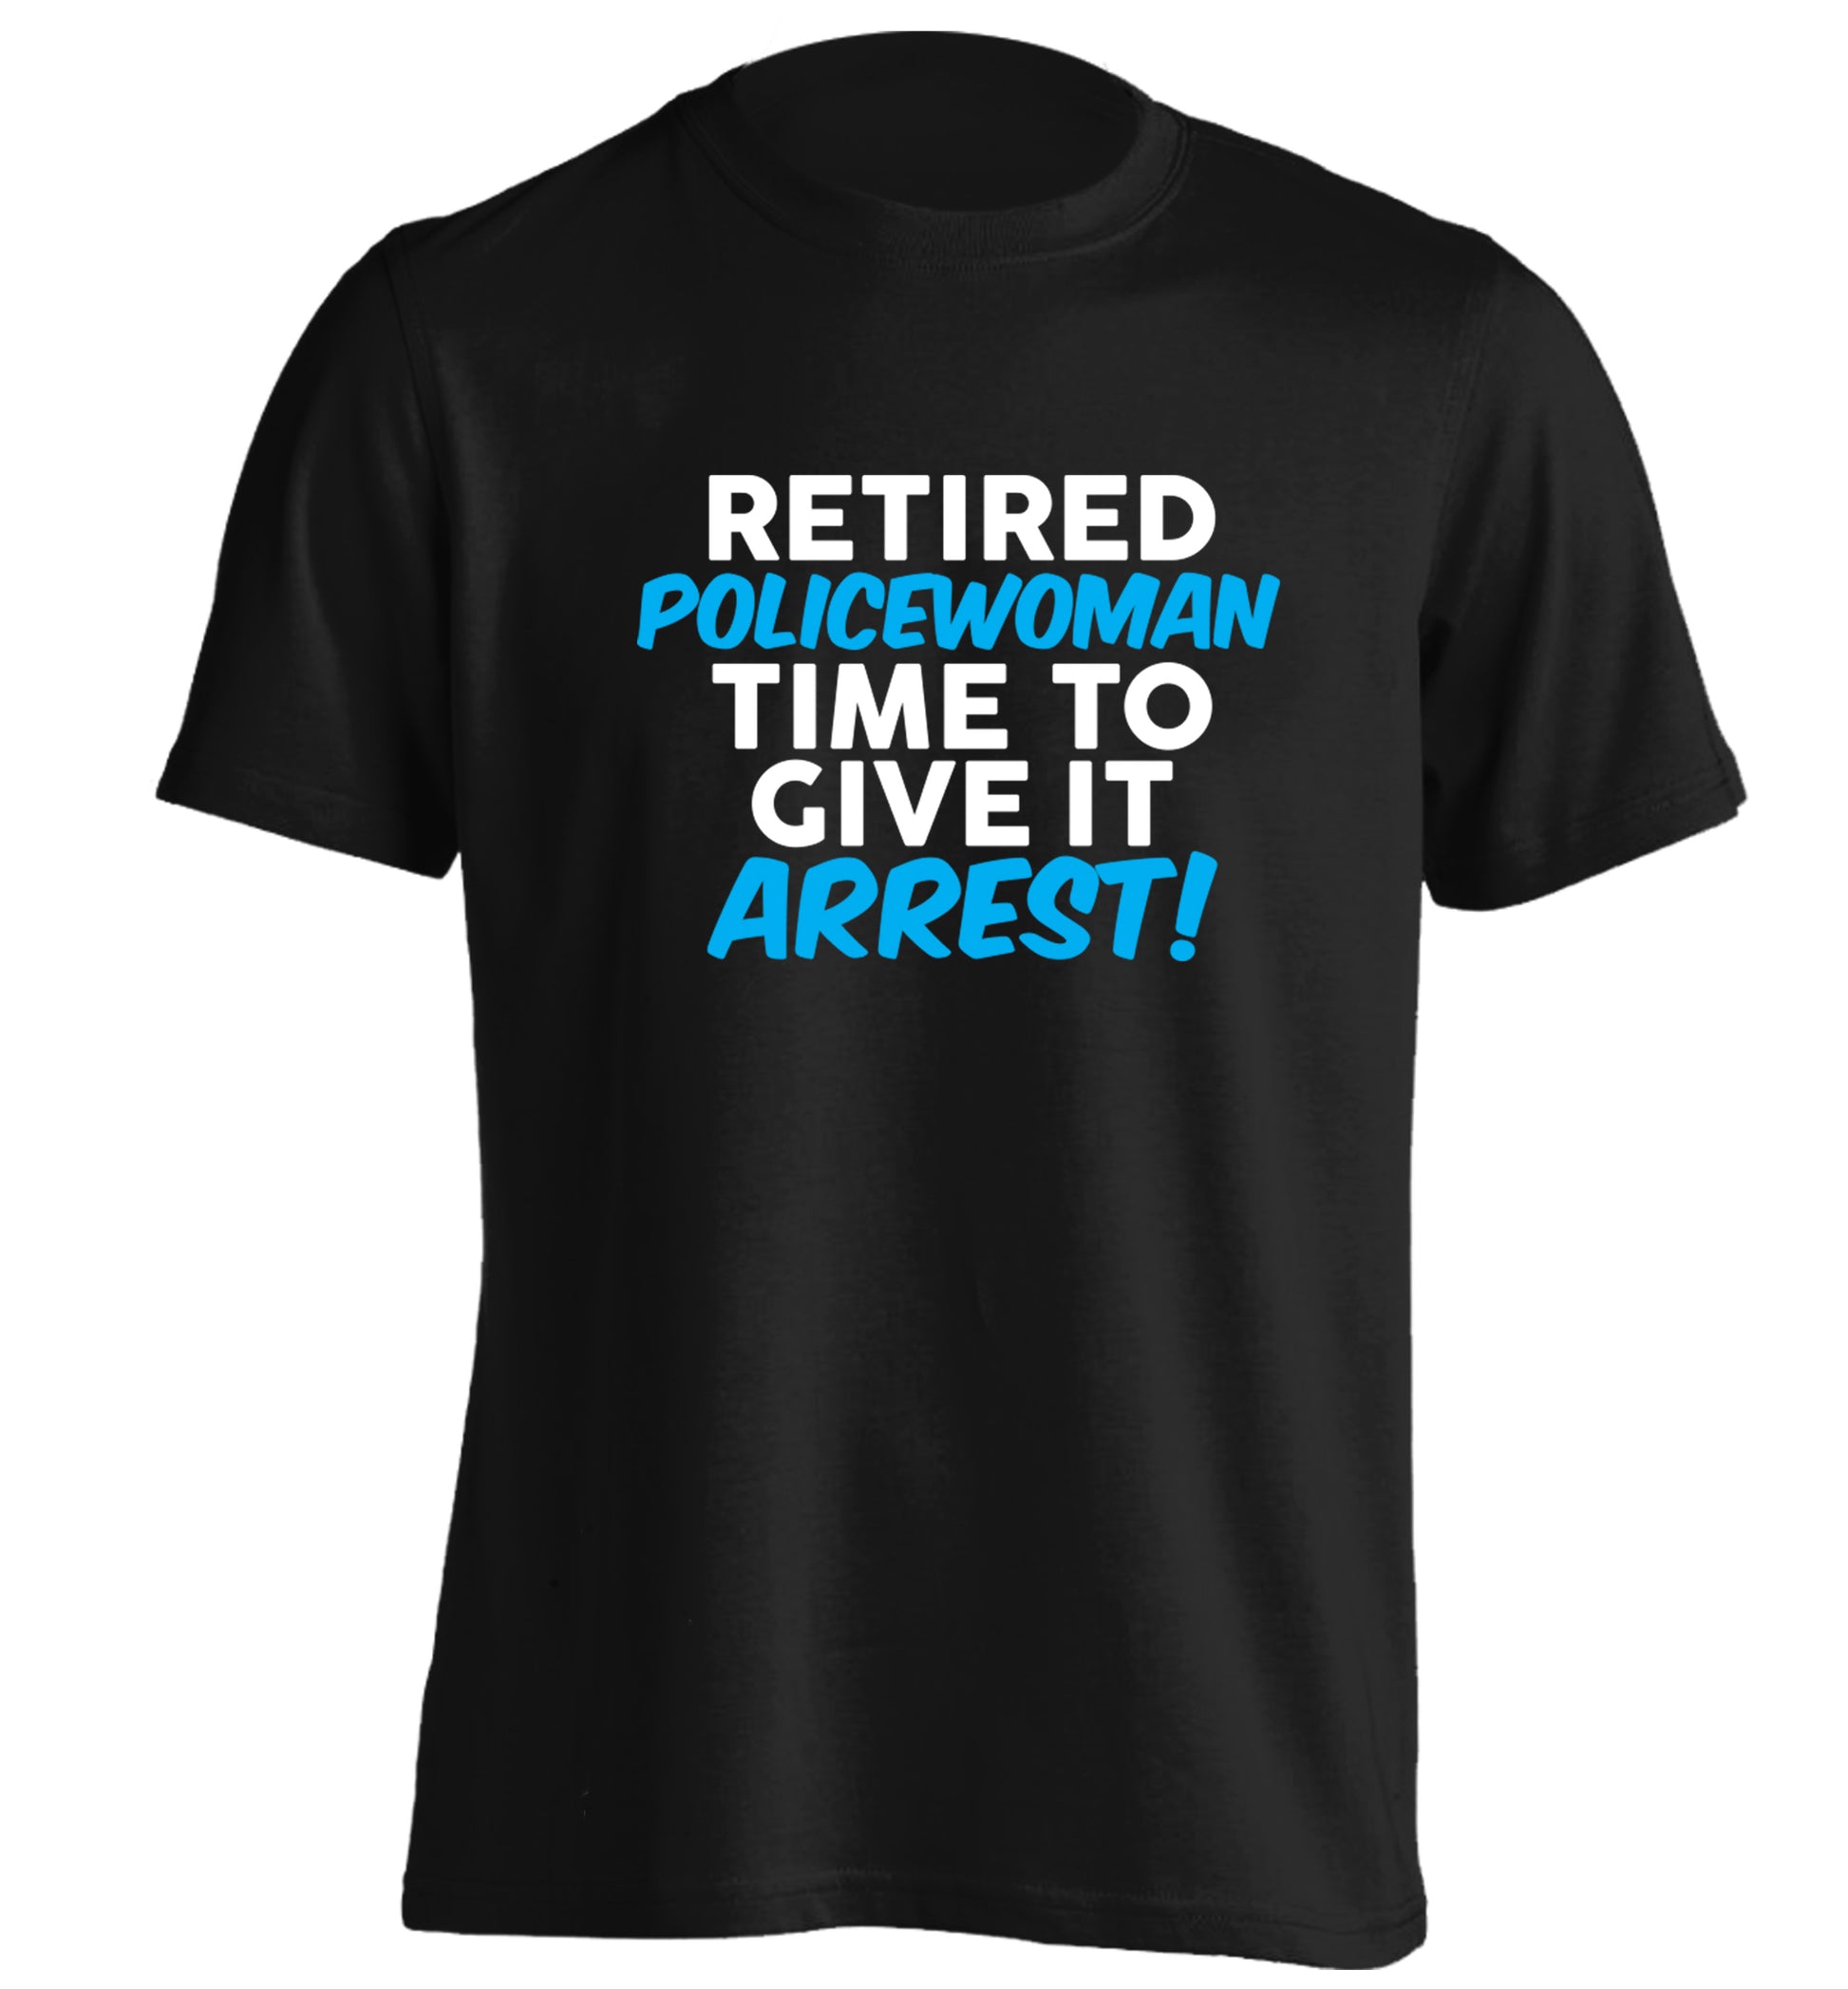 Retired policewoman time to give it arrest adults unisex black Tshirt 2XL